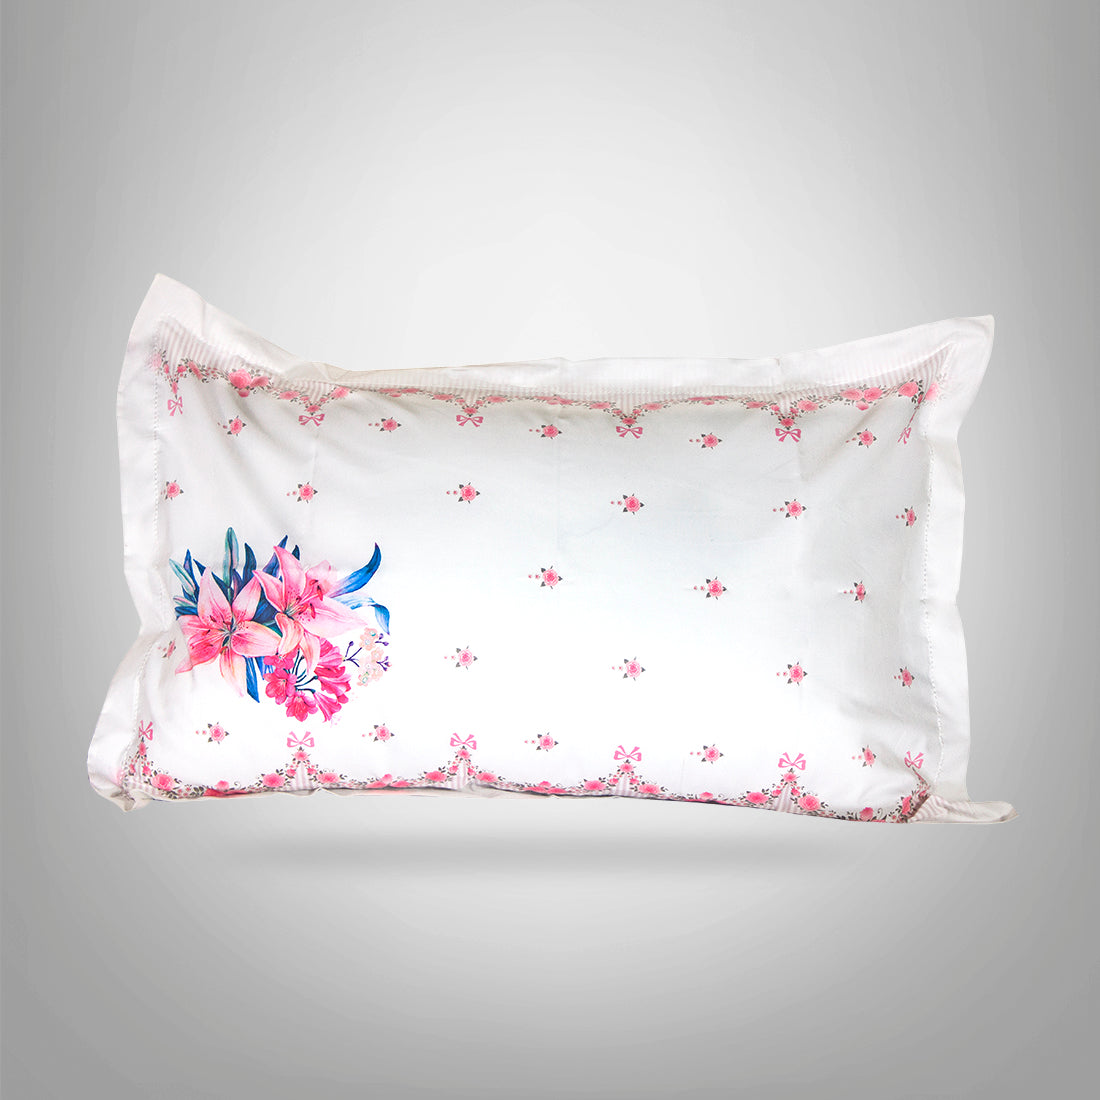 V2G Printed Pillow Covers- Scallop Flower Border- Pair